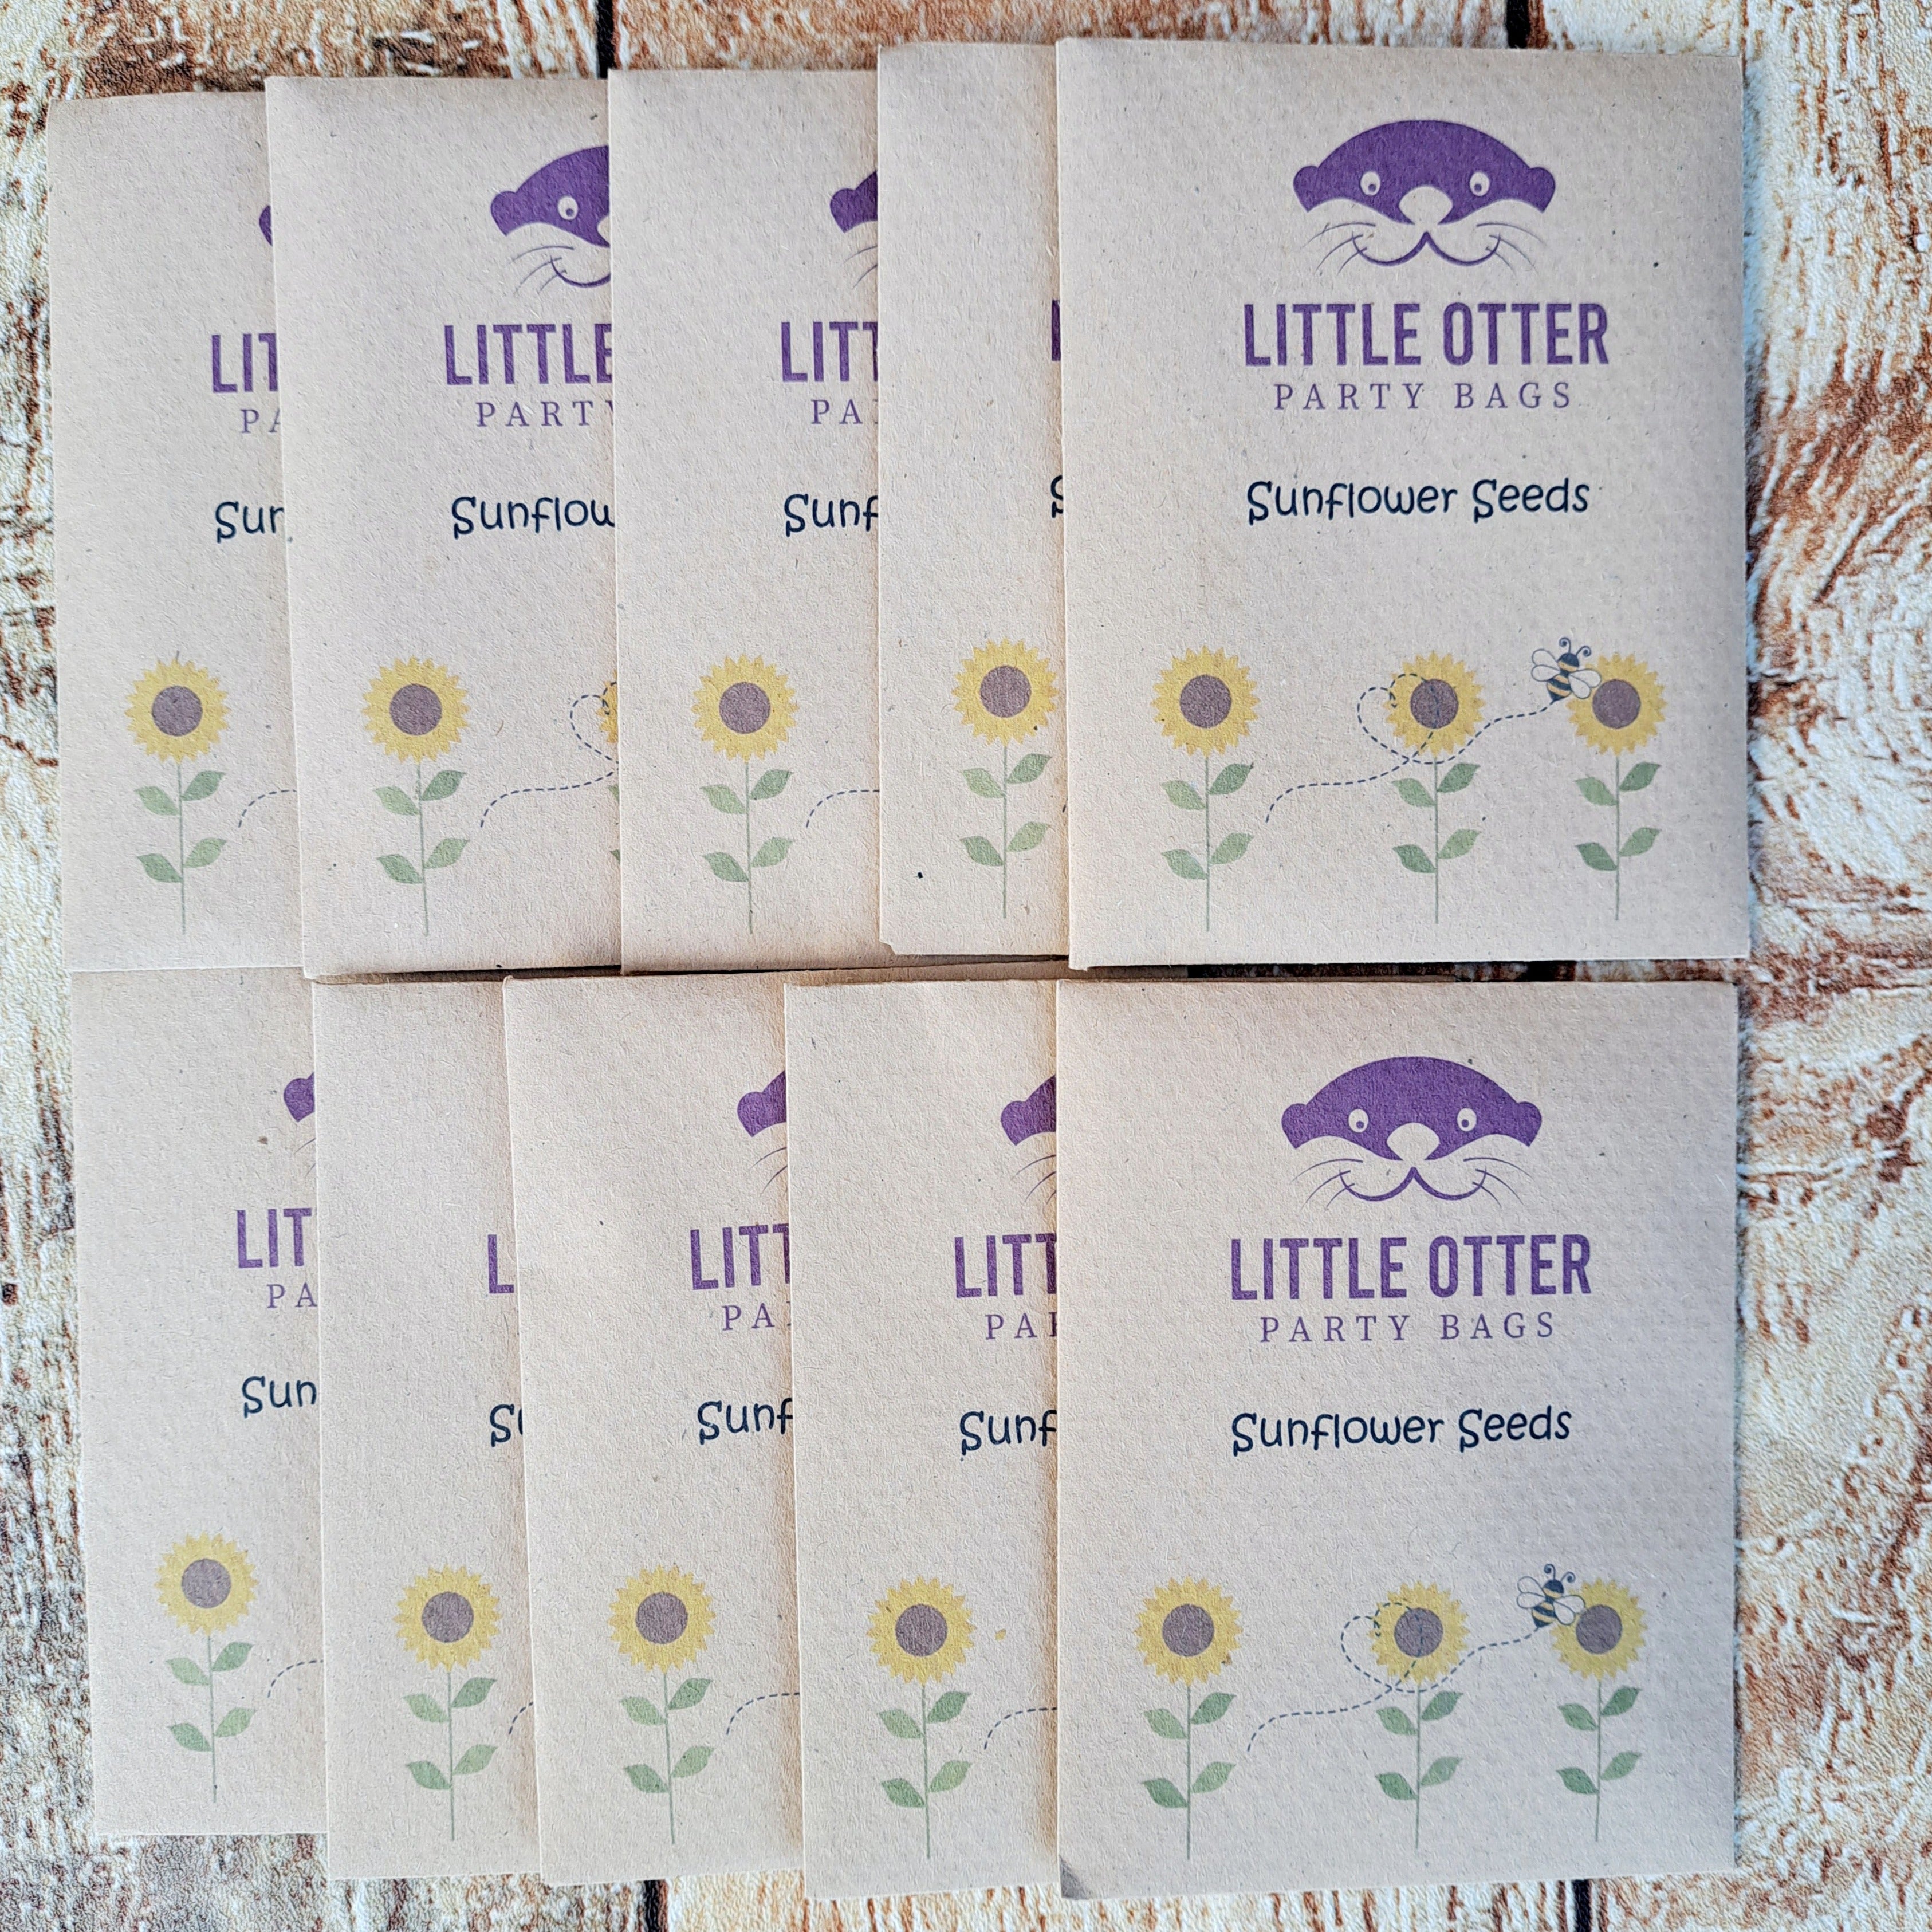 Sunflower Seed Party Bag Fillers